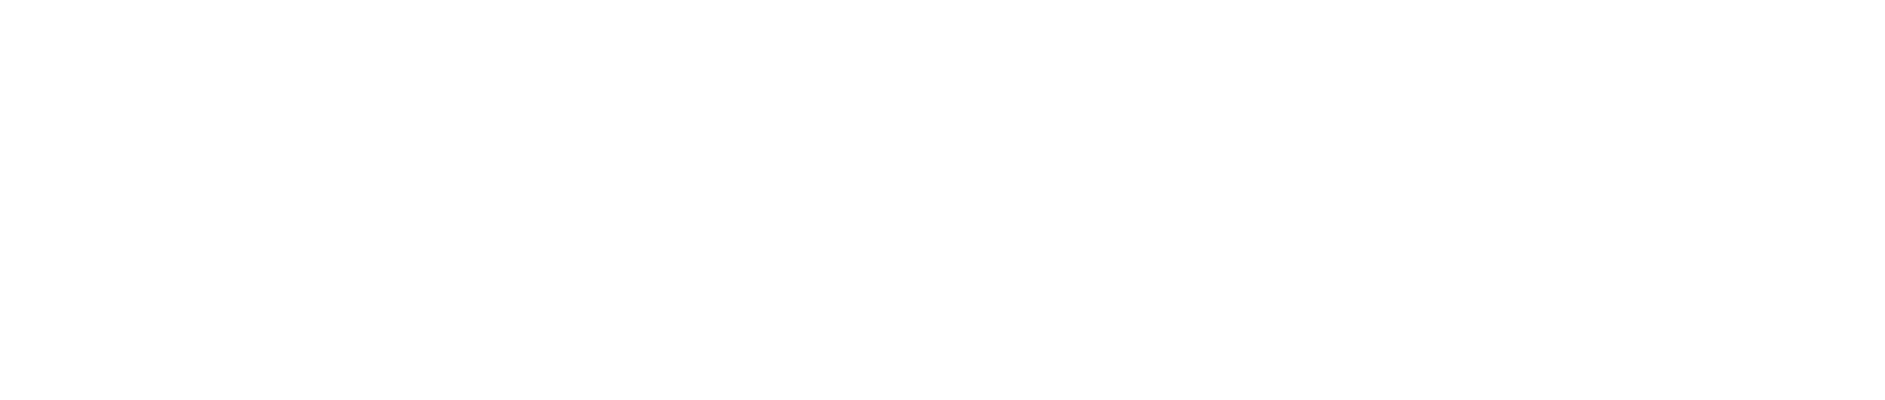 Assurance Consolidated Pharmacy